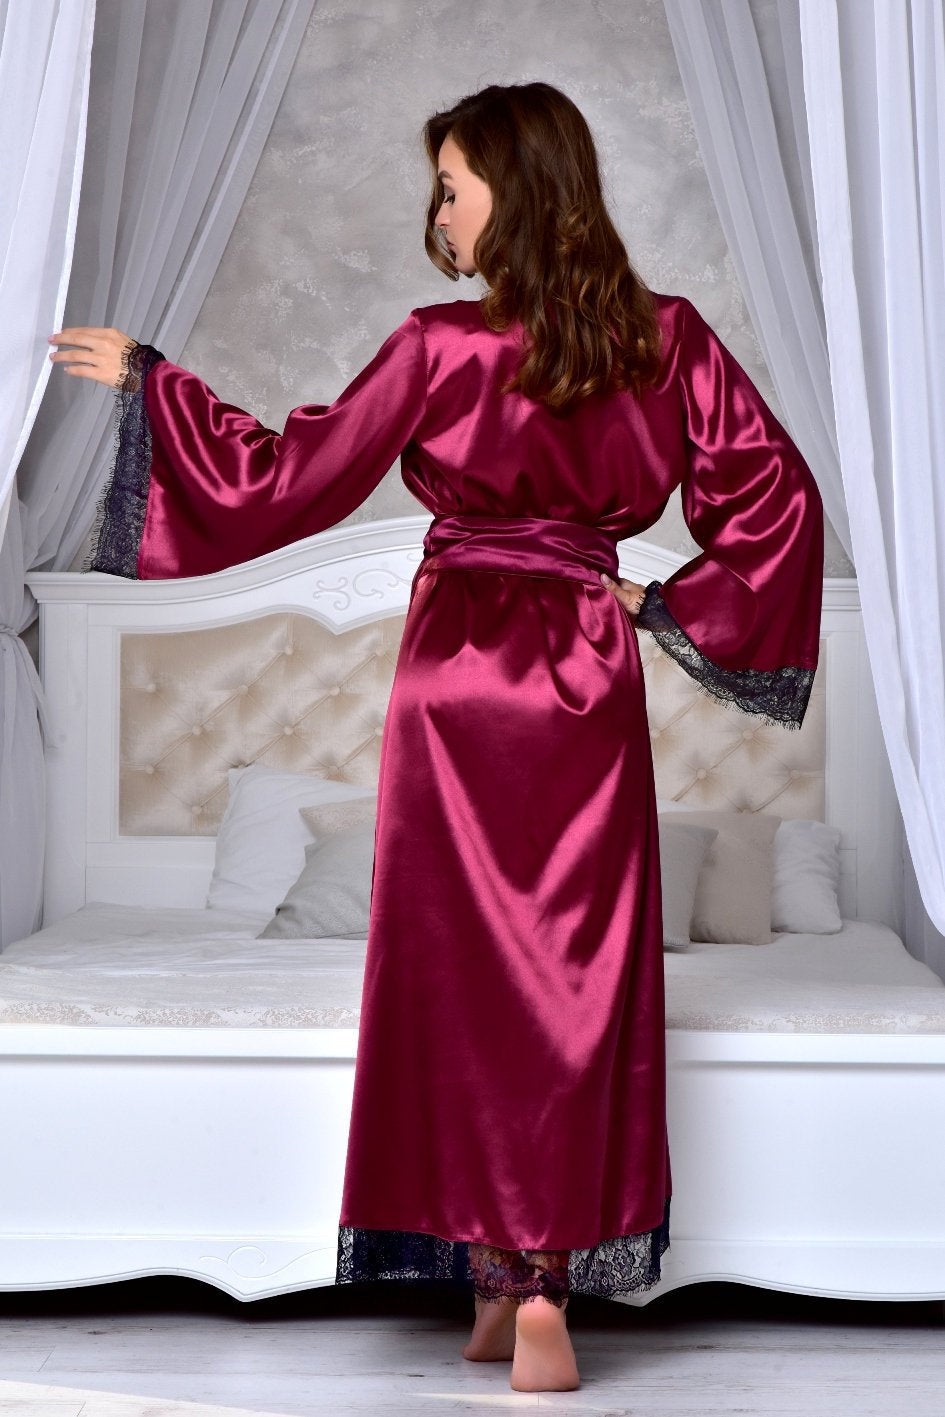 Chic kimono style in our Burgundy Satin Bridal Robe for a memorable photoshoot